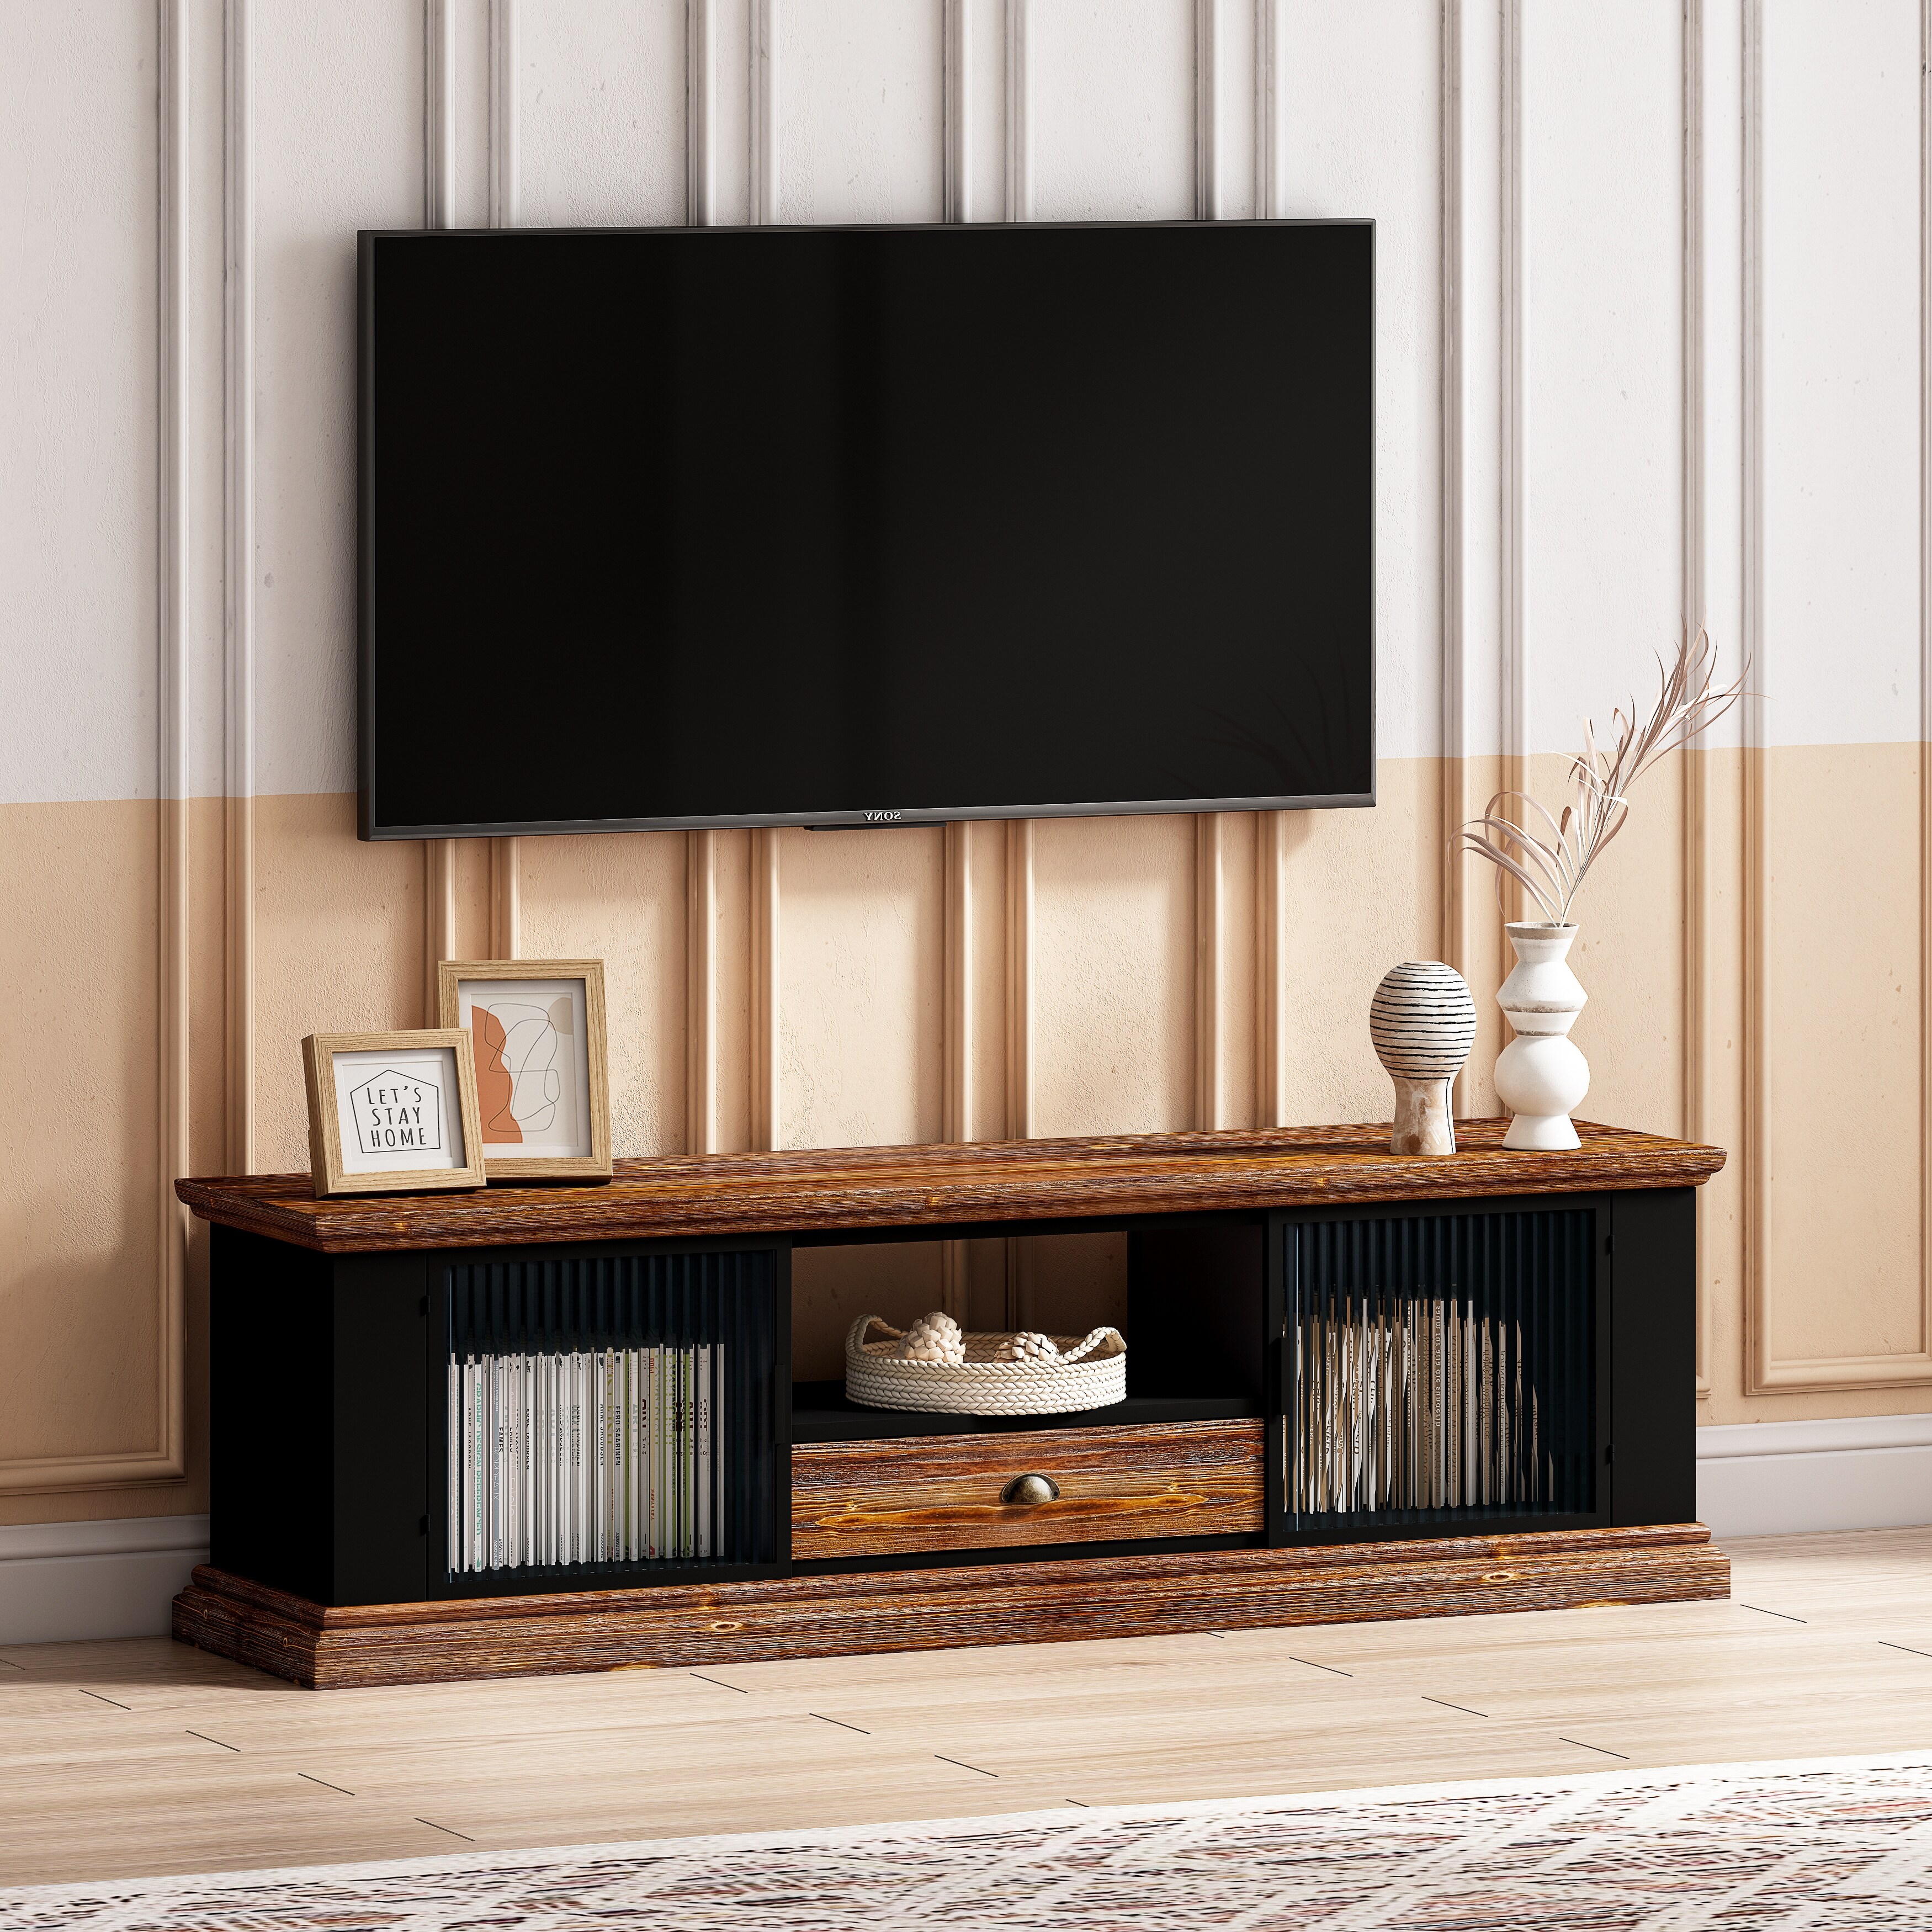 https://ak1.ostkcdn.com/images/products/is/images/direct/7ab9f1c2382c8bf4cd7d614c17eac6d489171c7e/Modern-Design-TV-stand-with-2-Storage-Cabinets-and-Drawer%2CTV-Console-Table-Media-Cabinet%2Cfor-Living-Room-Bedroom.jpg